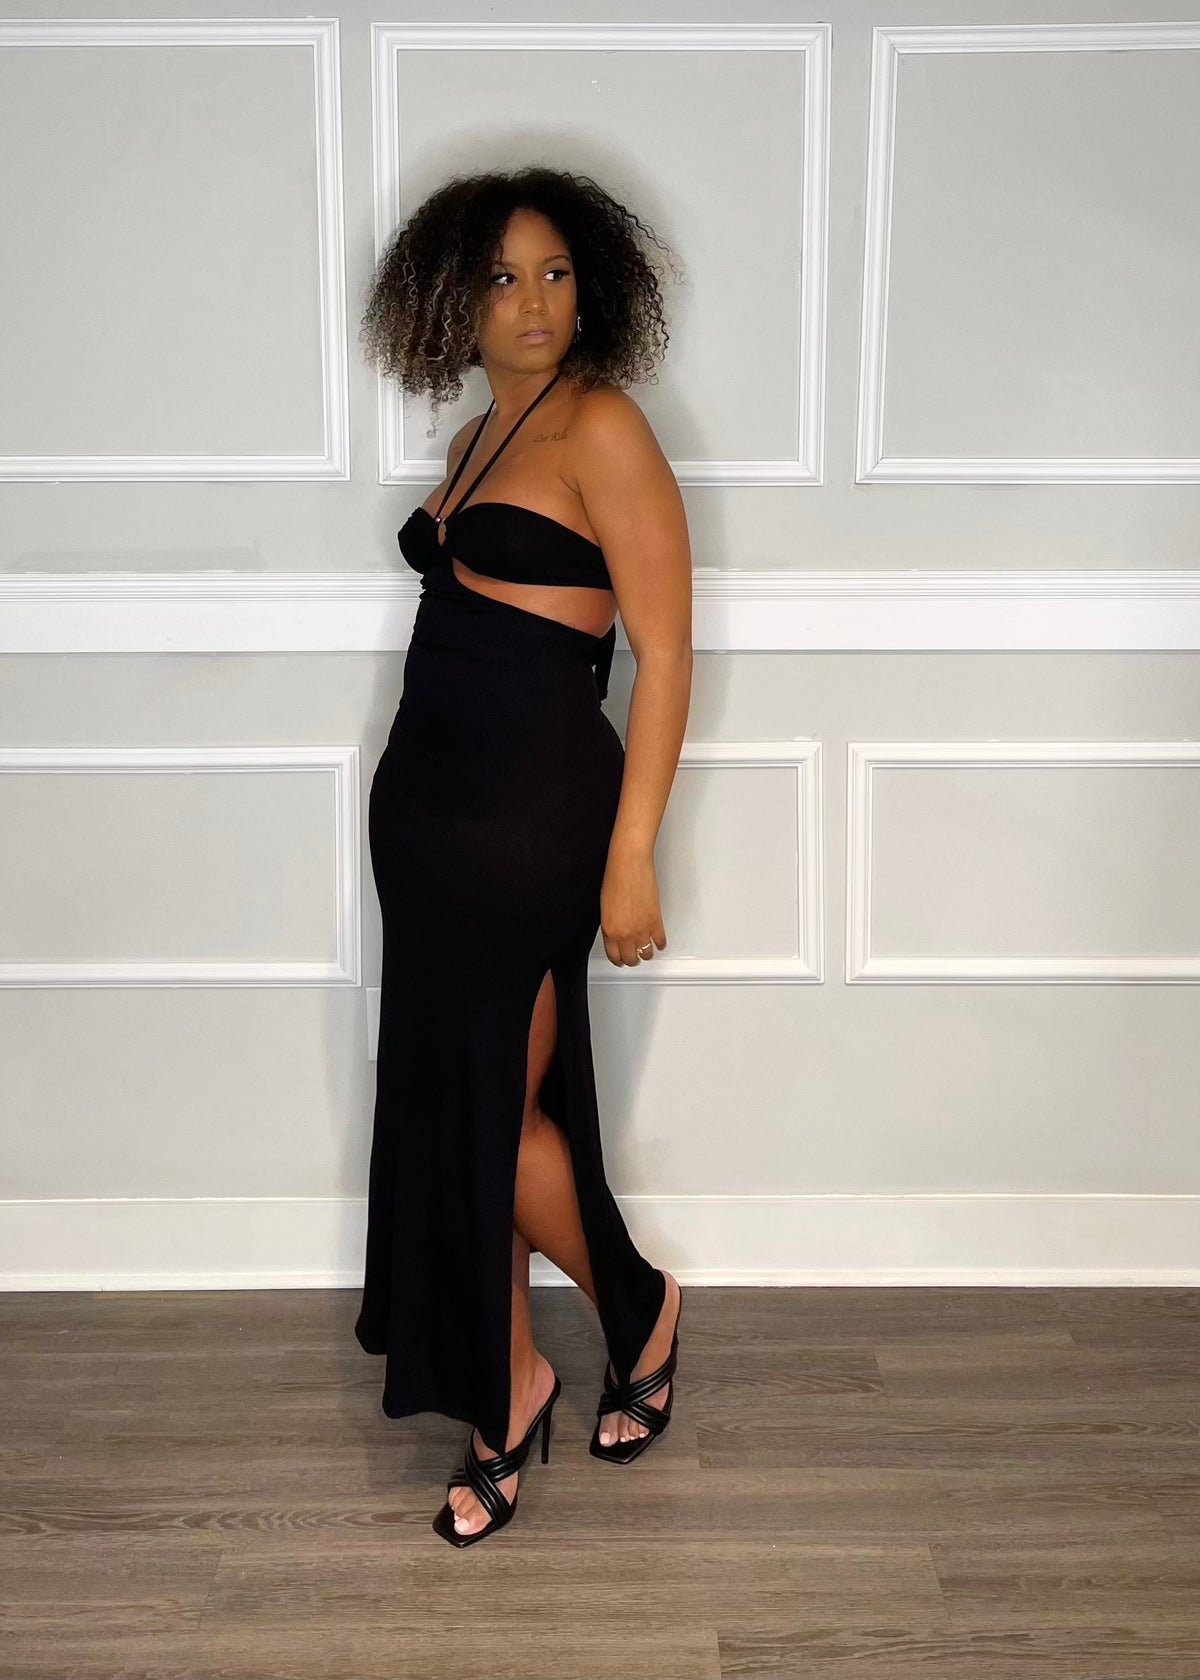 Get trendy with Britt Black Halter Cut-out Maxi Dress - Dresses available at ELLE TENAJ. Grab yours for $20 today!